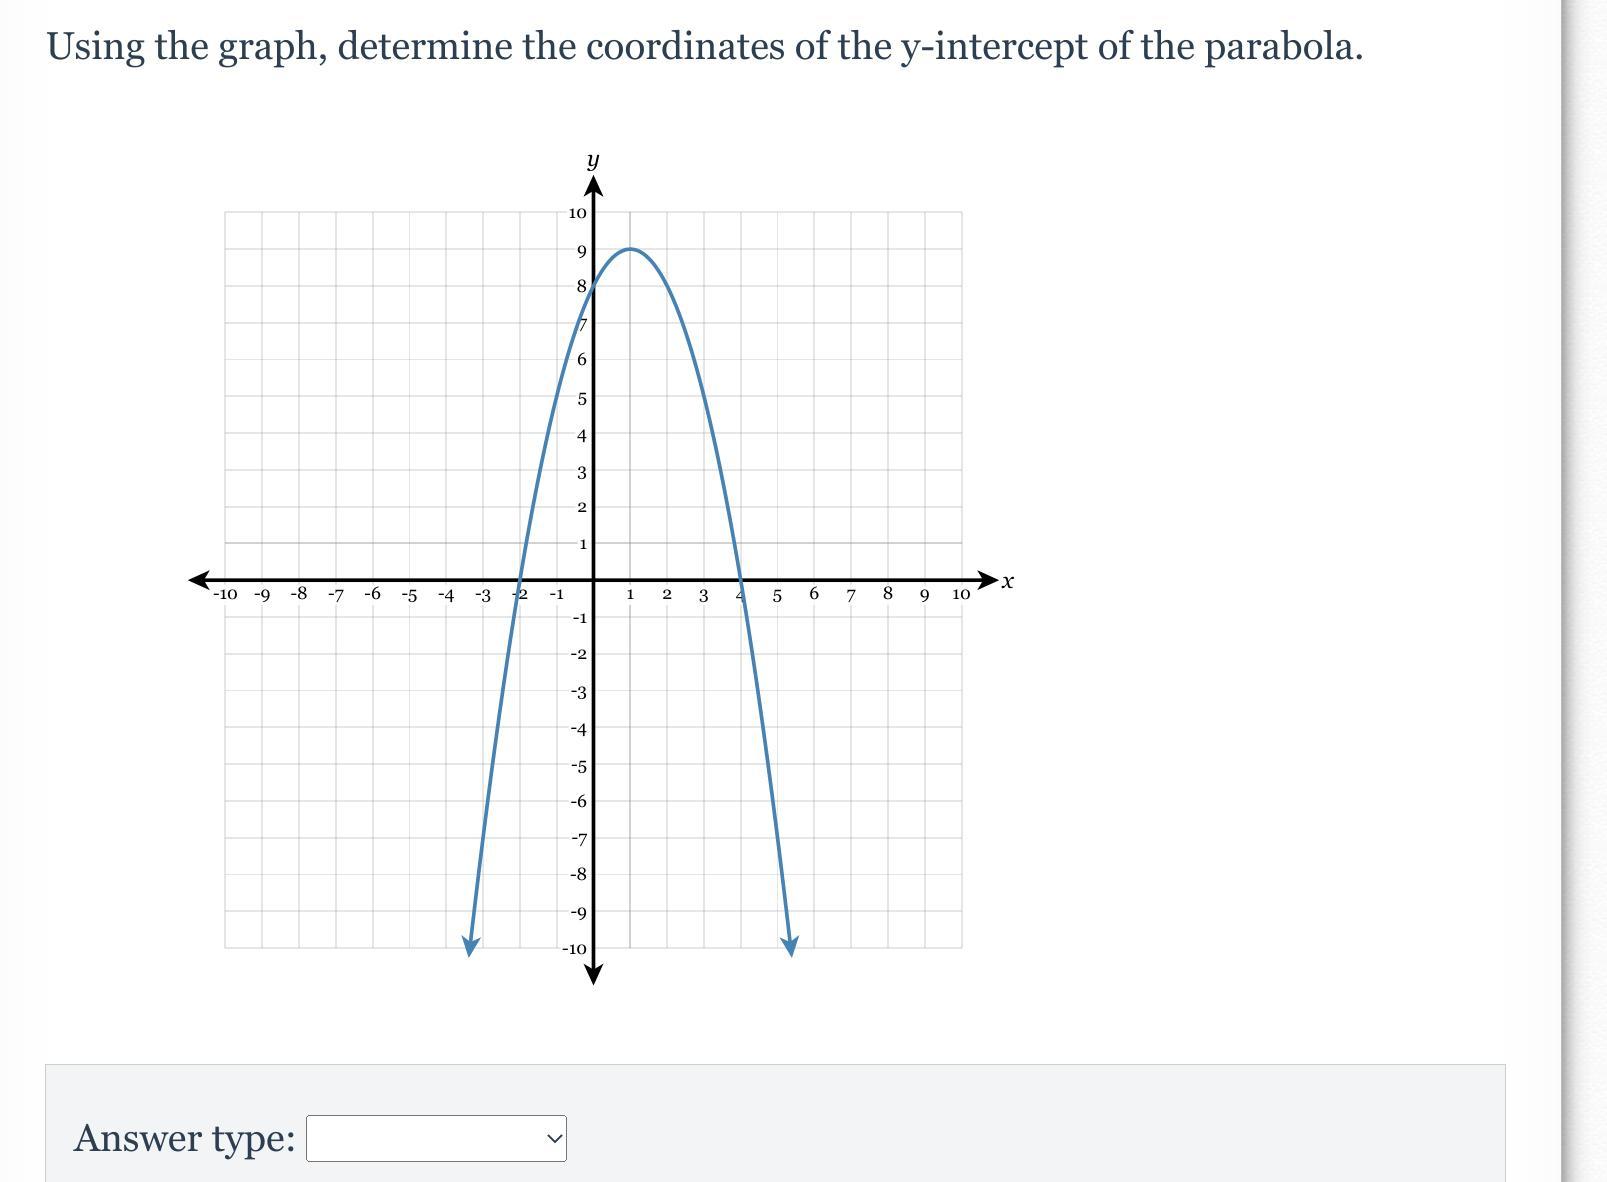 Using The Graph, Determine The Coordinates Of The Y-intercept Of The Parabola.